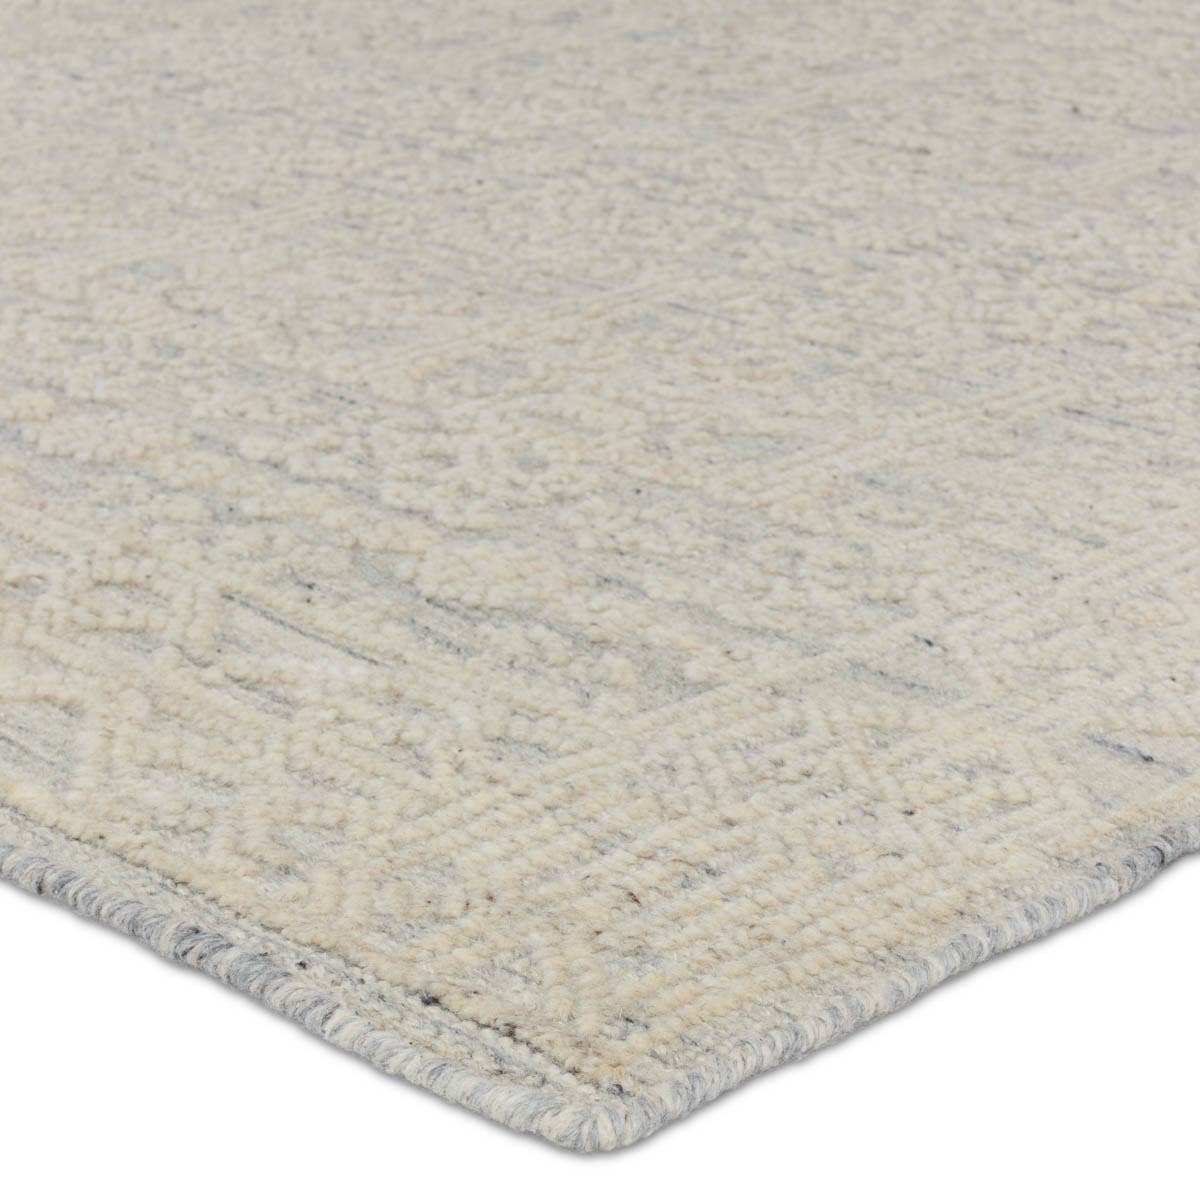 The captivating Reign Ria Rug by Jaipur Living introduces detail-rich design and inviting high-low pile to contemporary and traditional homes alike. Hand knotted by skilled artisans, the Ria wool rug creates depth and dimension with a cozy inviting cream and light blue palette. Amethyst Home provides interior design services, furniture, rugs, and lighting in the Omaha metro area.